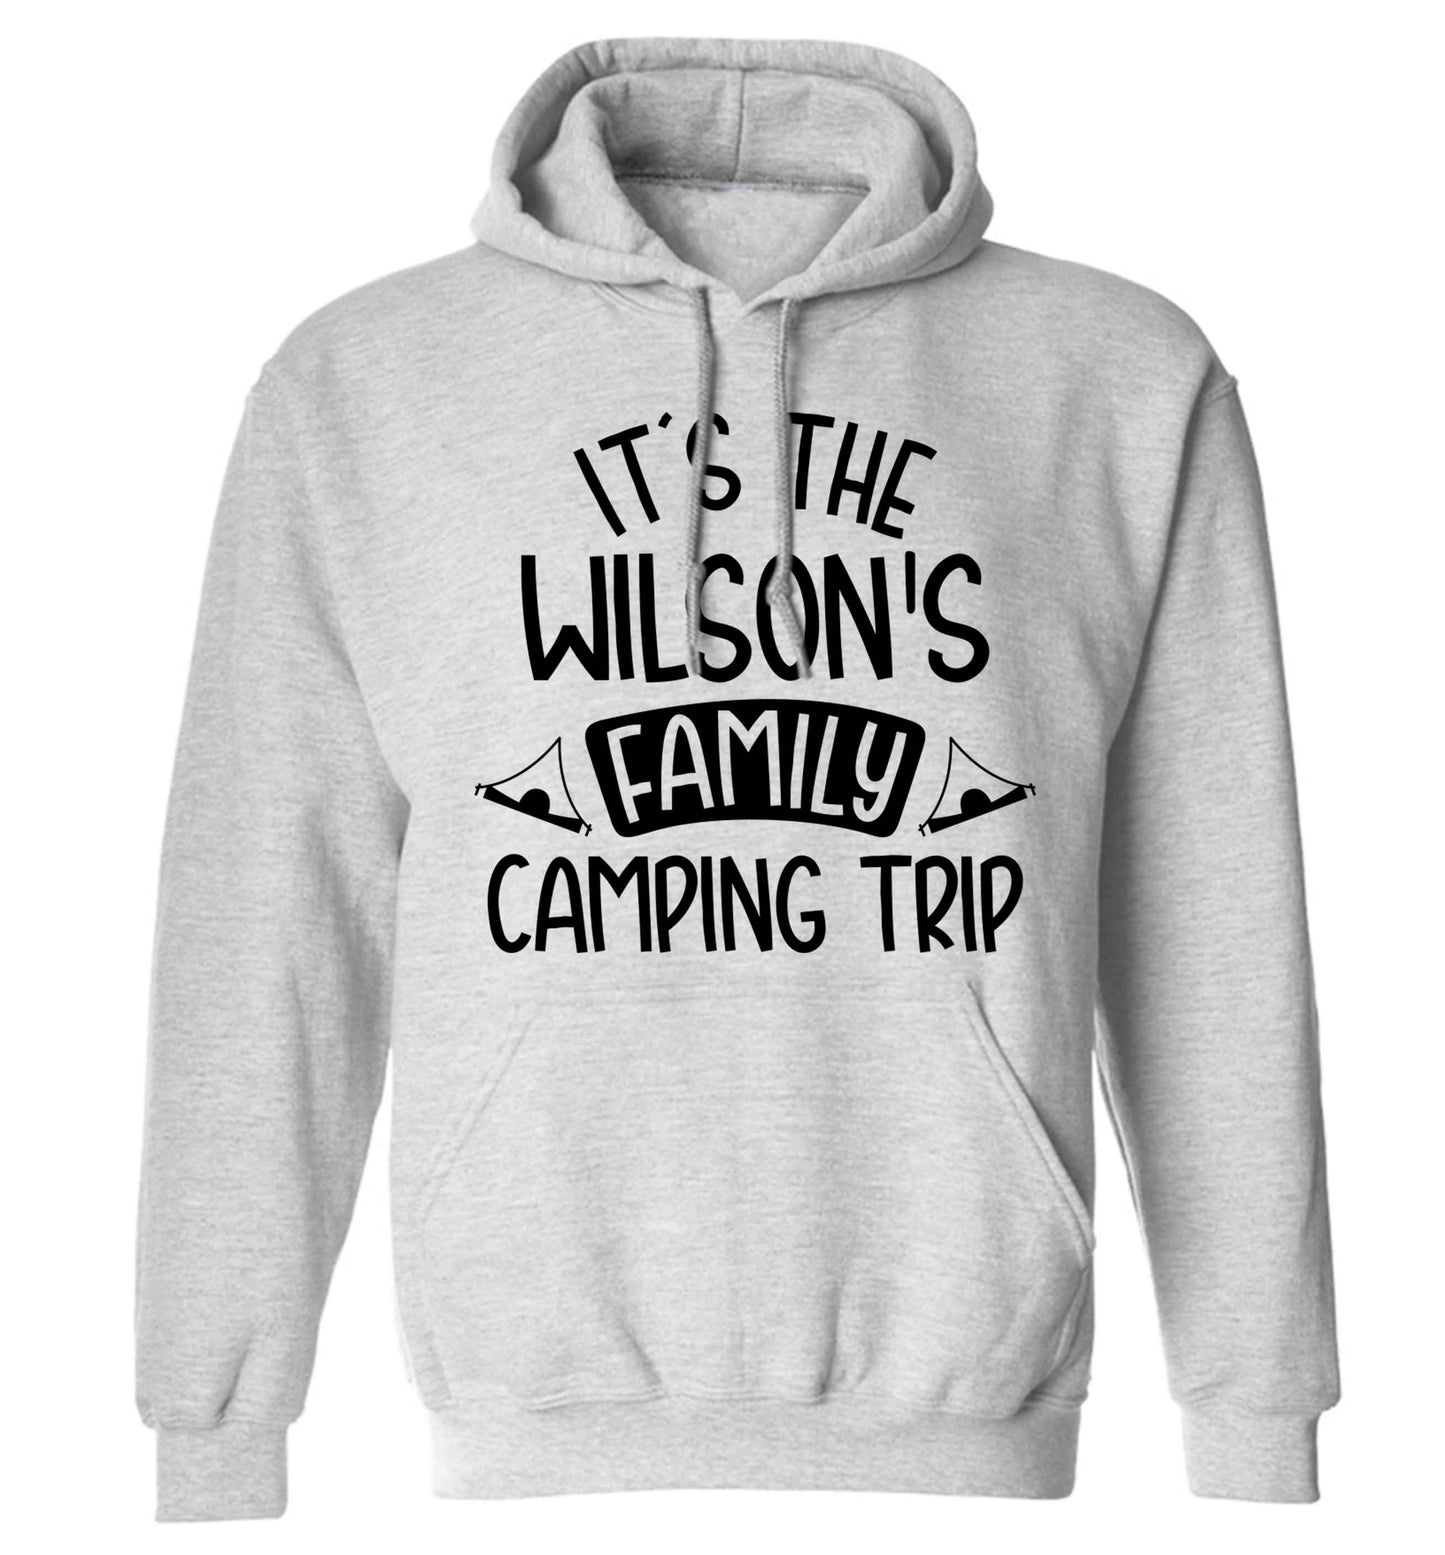 It's the Wilson's family camping trip personalised adults unisex grey hoodie 2XL